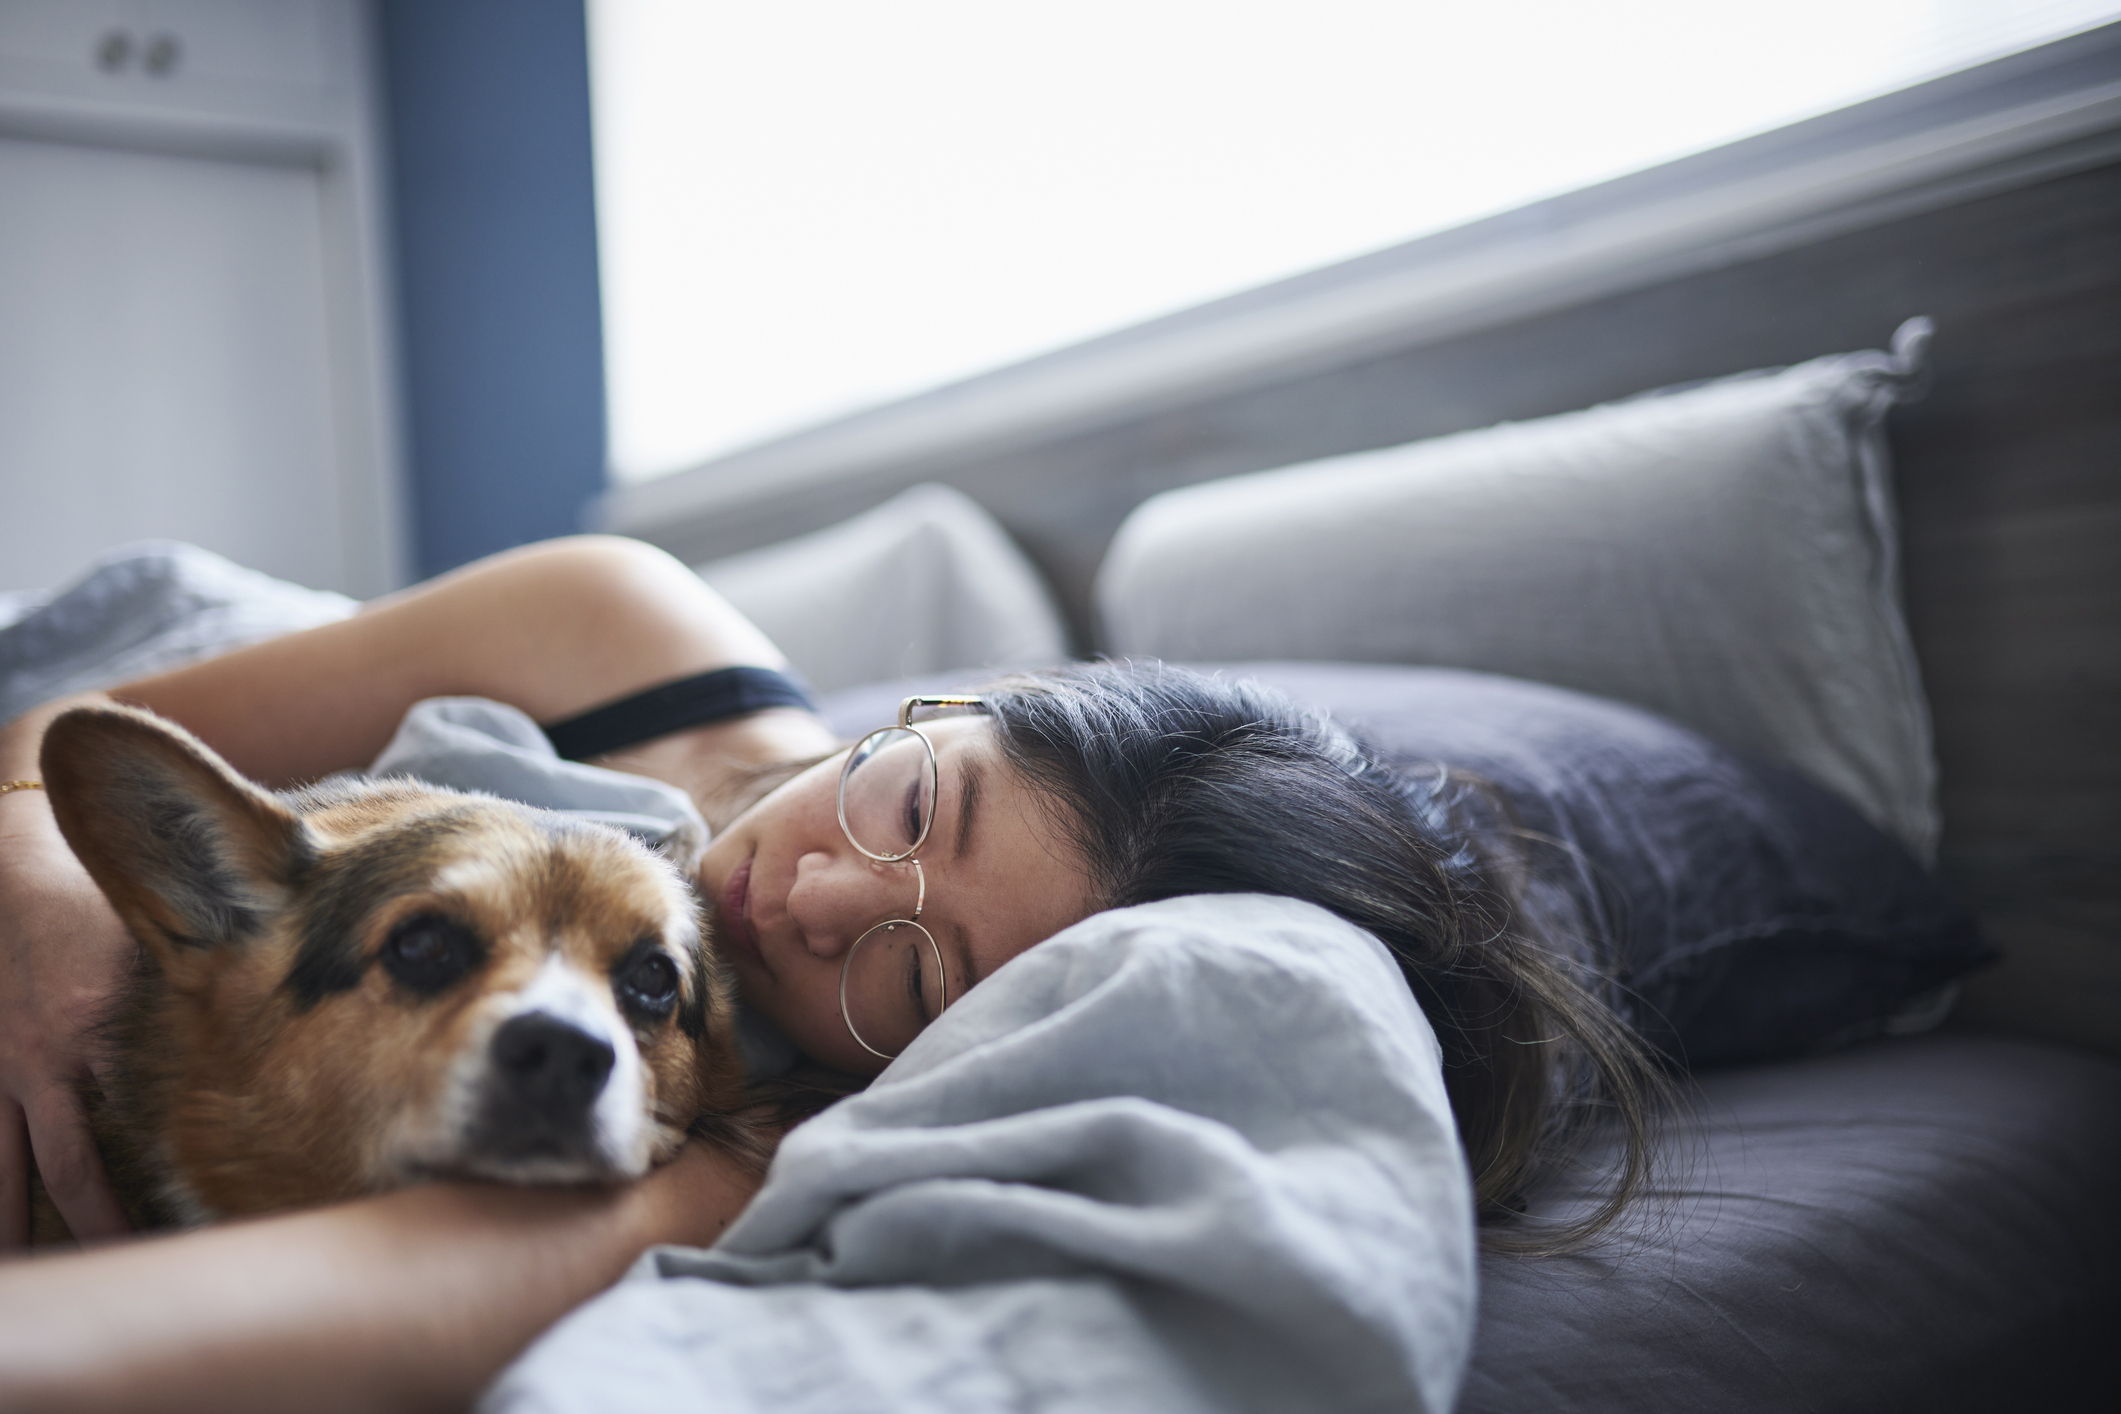 Can Dogs Get COVID? What to Know About the Coronavirus and Pets